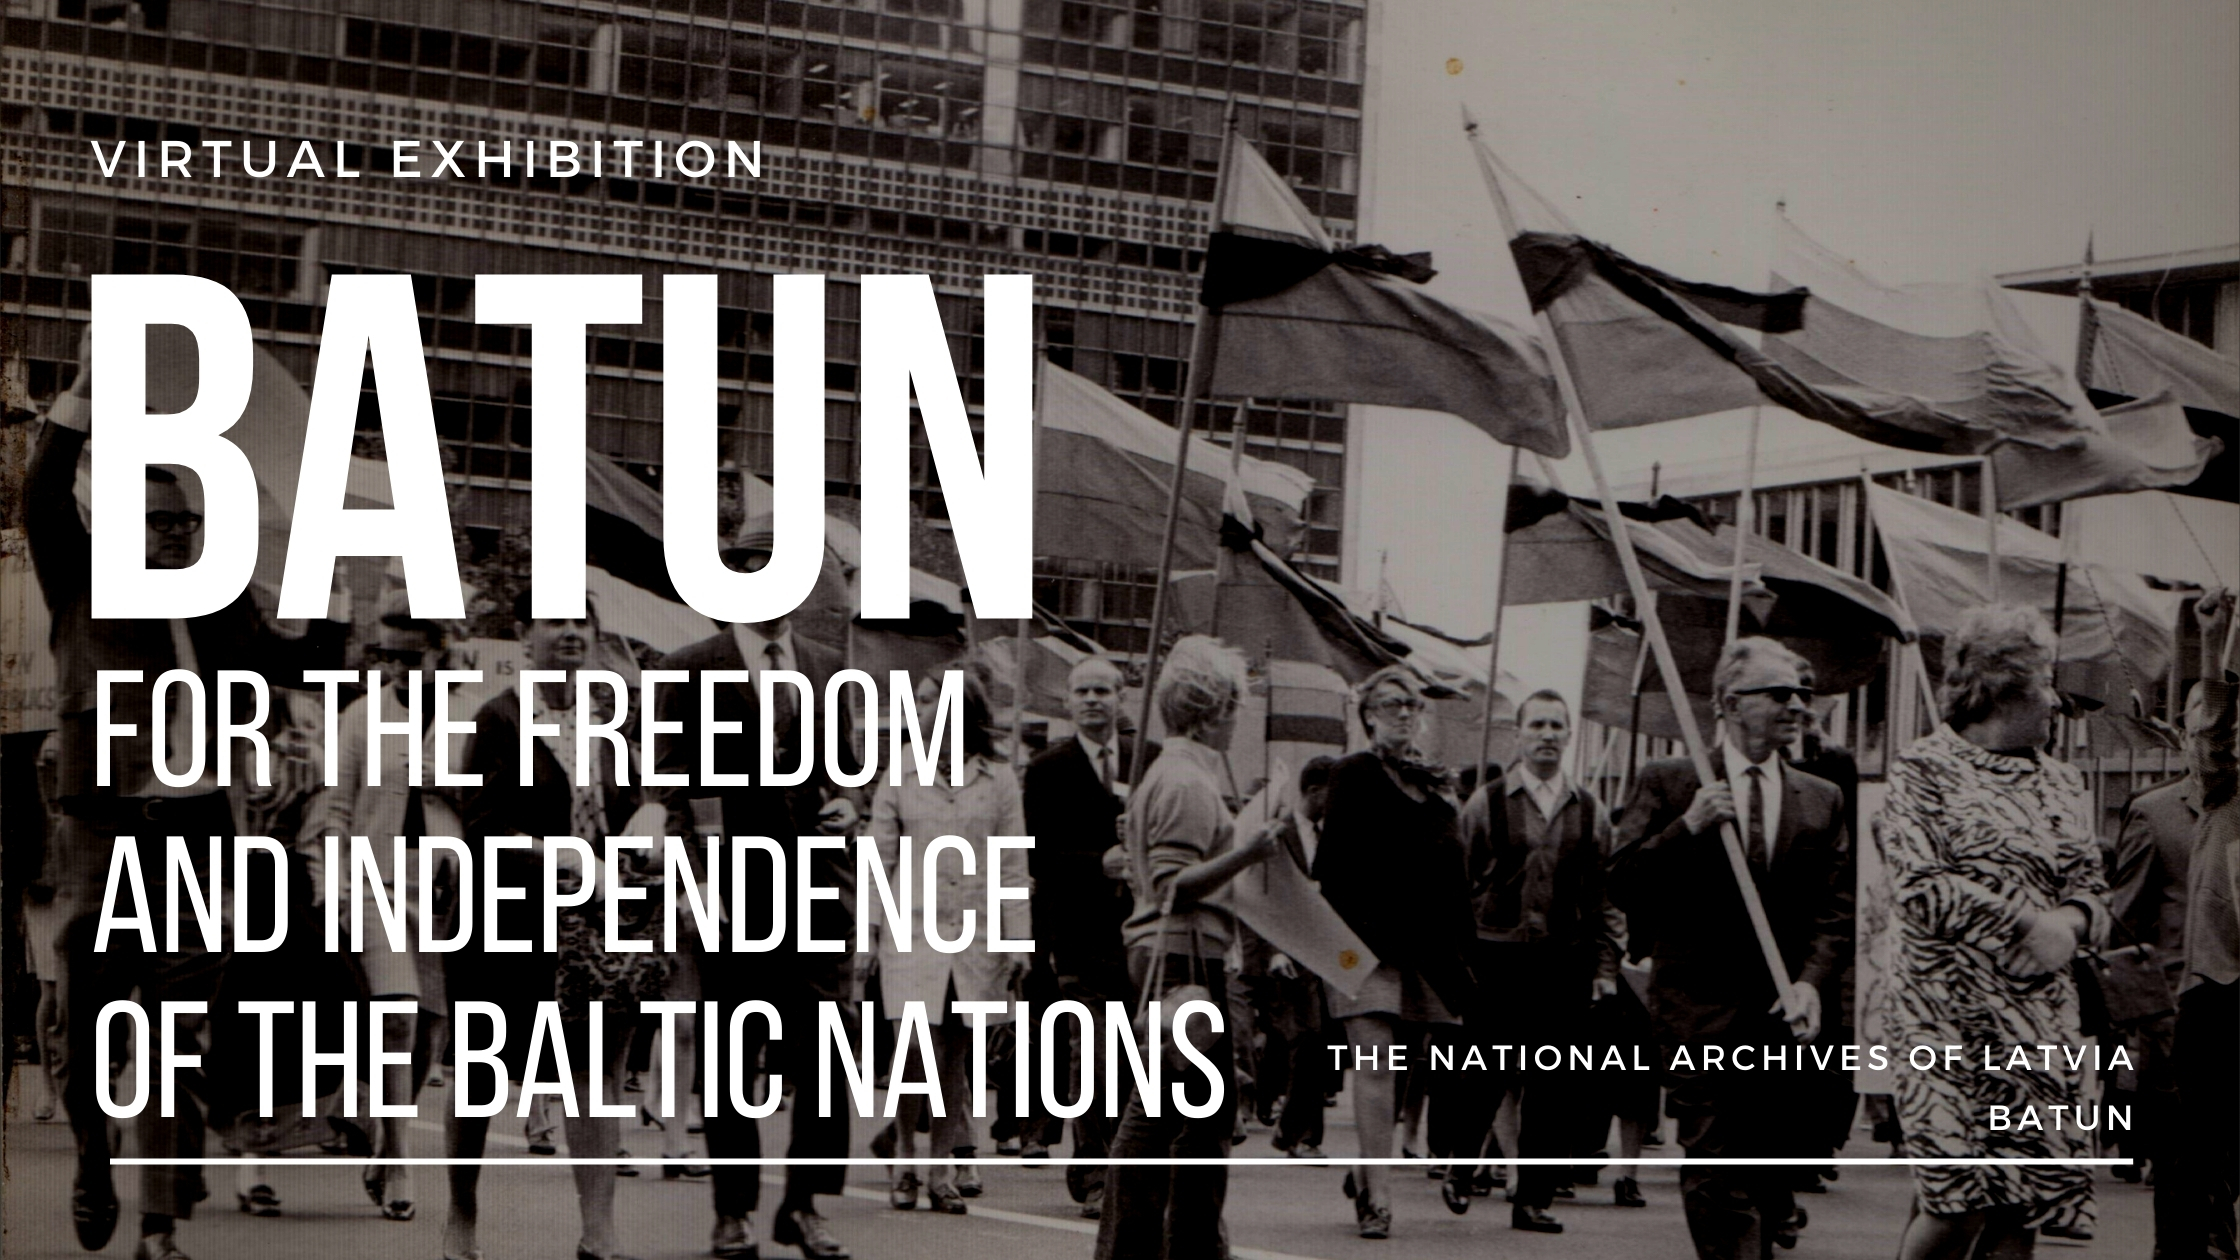 BATUN. For The Freedom and Independence of Baltic Nations